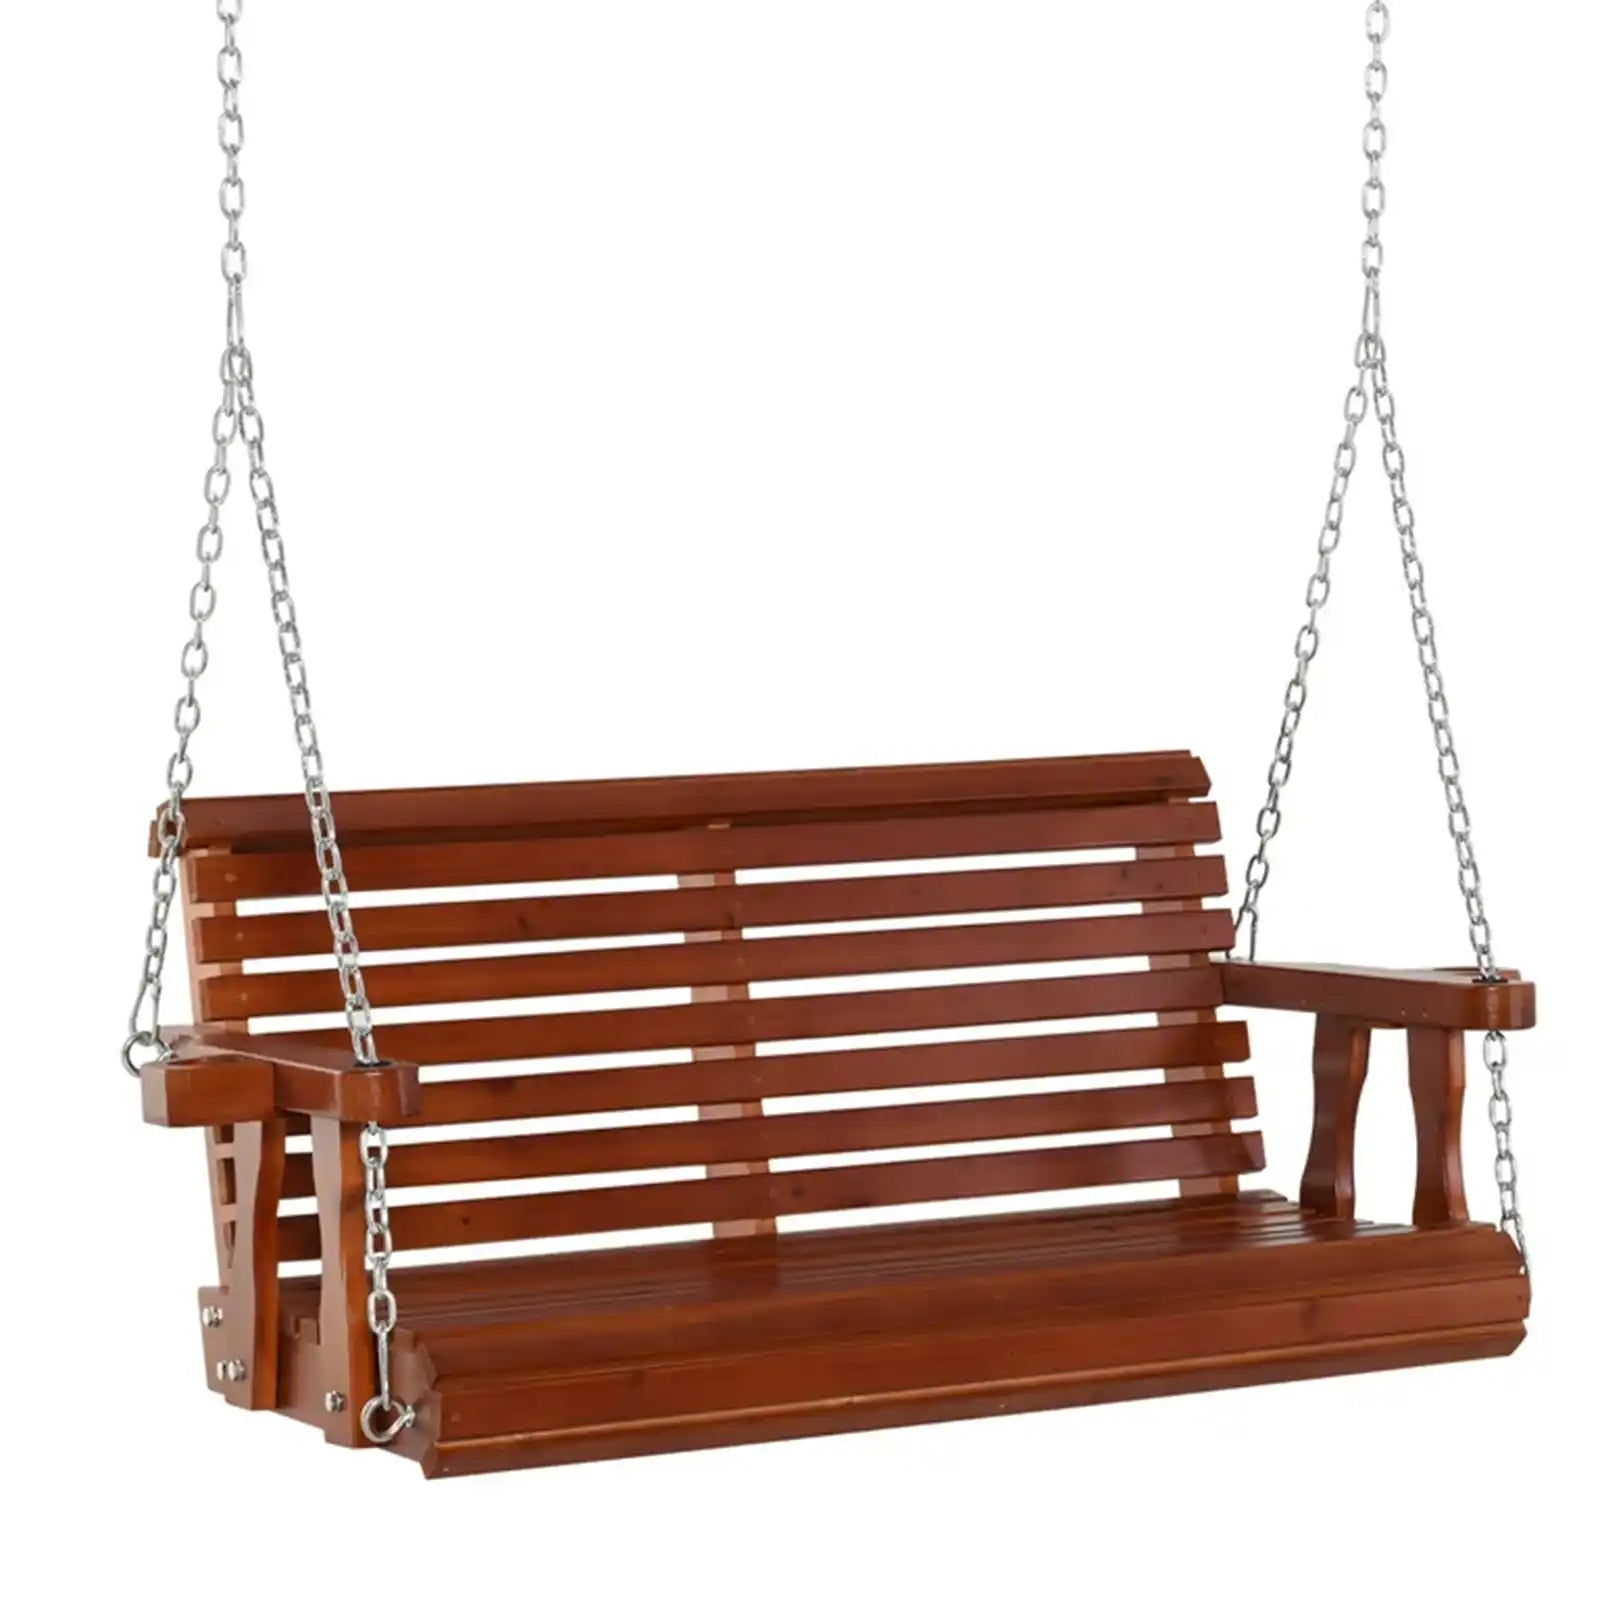 Porch Swing with Chains and Cupholders, 2 Person Wooden Patio Swing Chair for Garden, Poolside, Backyard